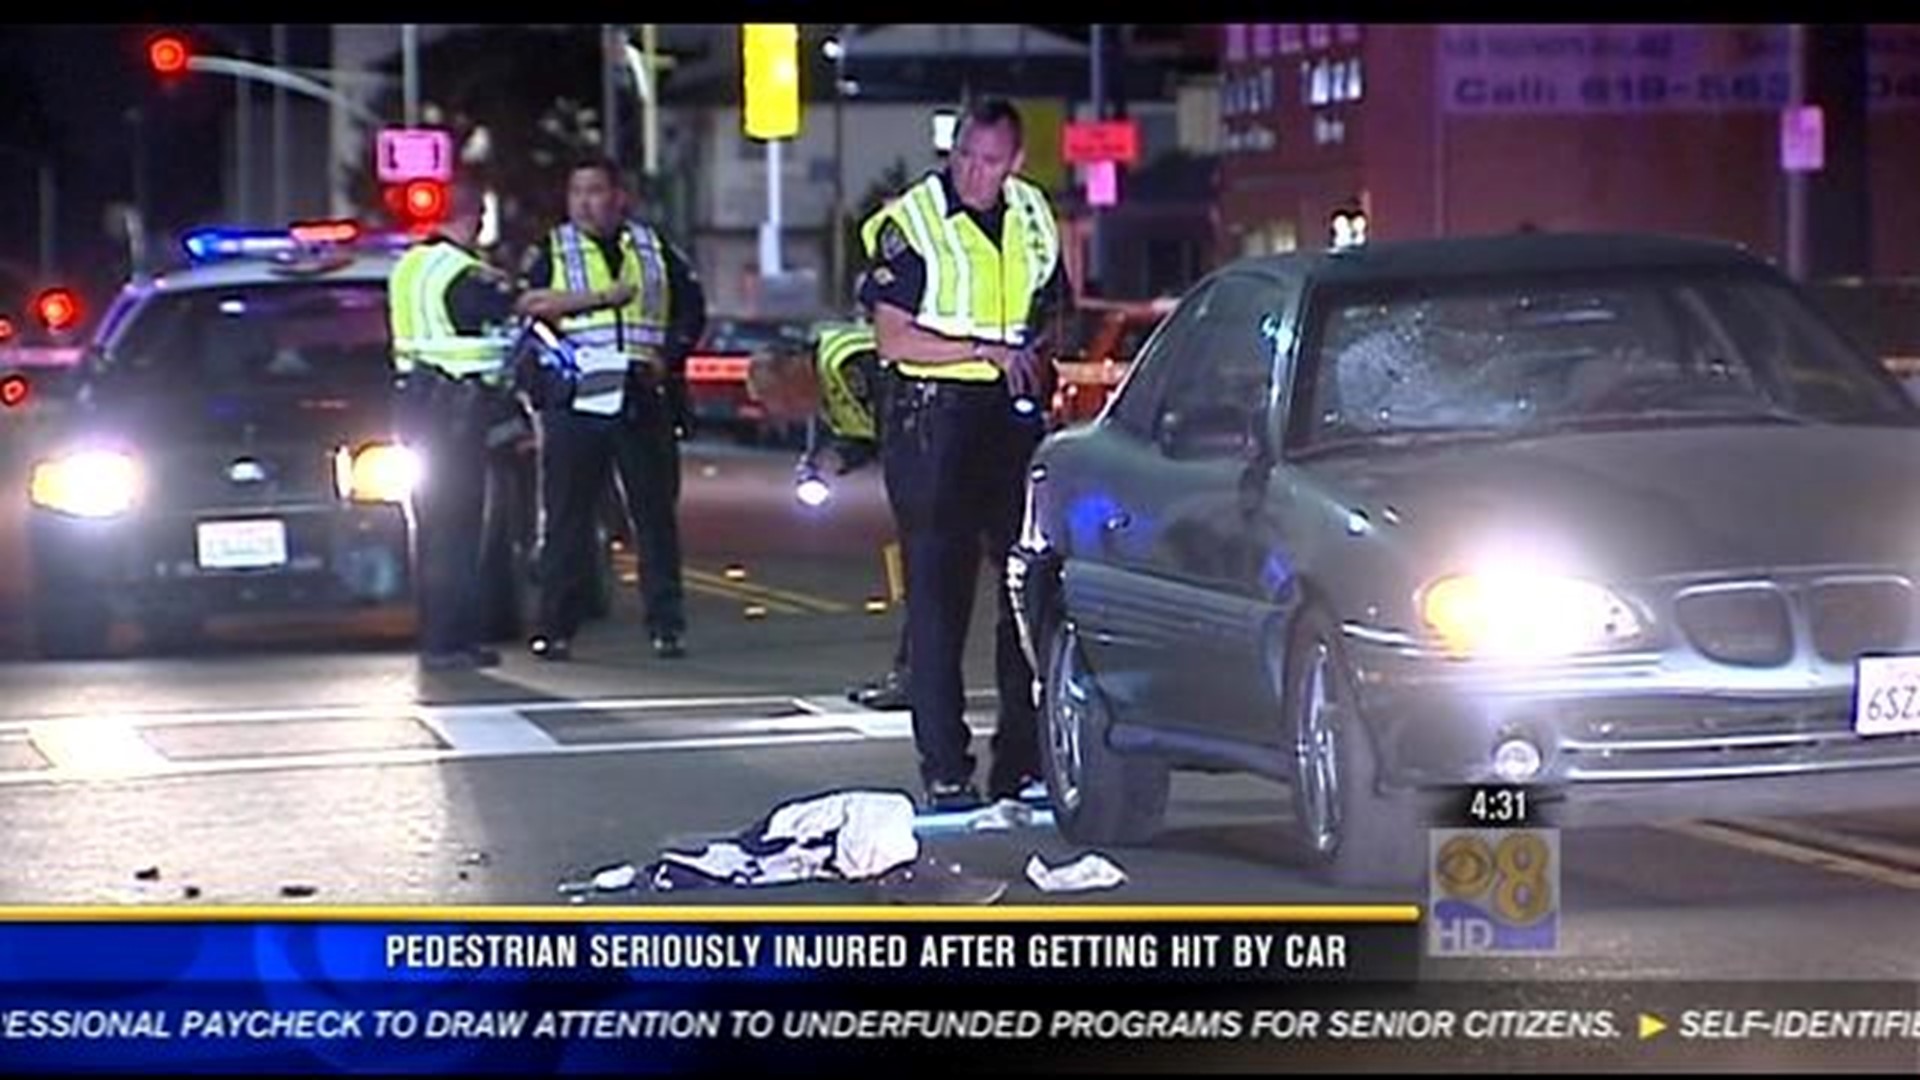 Pedestrian seriously hurt after getting hit by car | cbs8.com